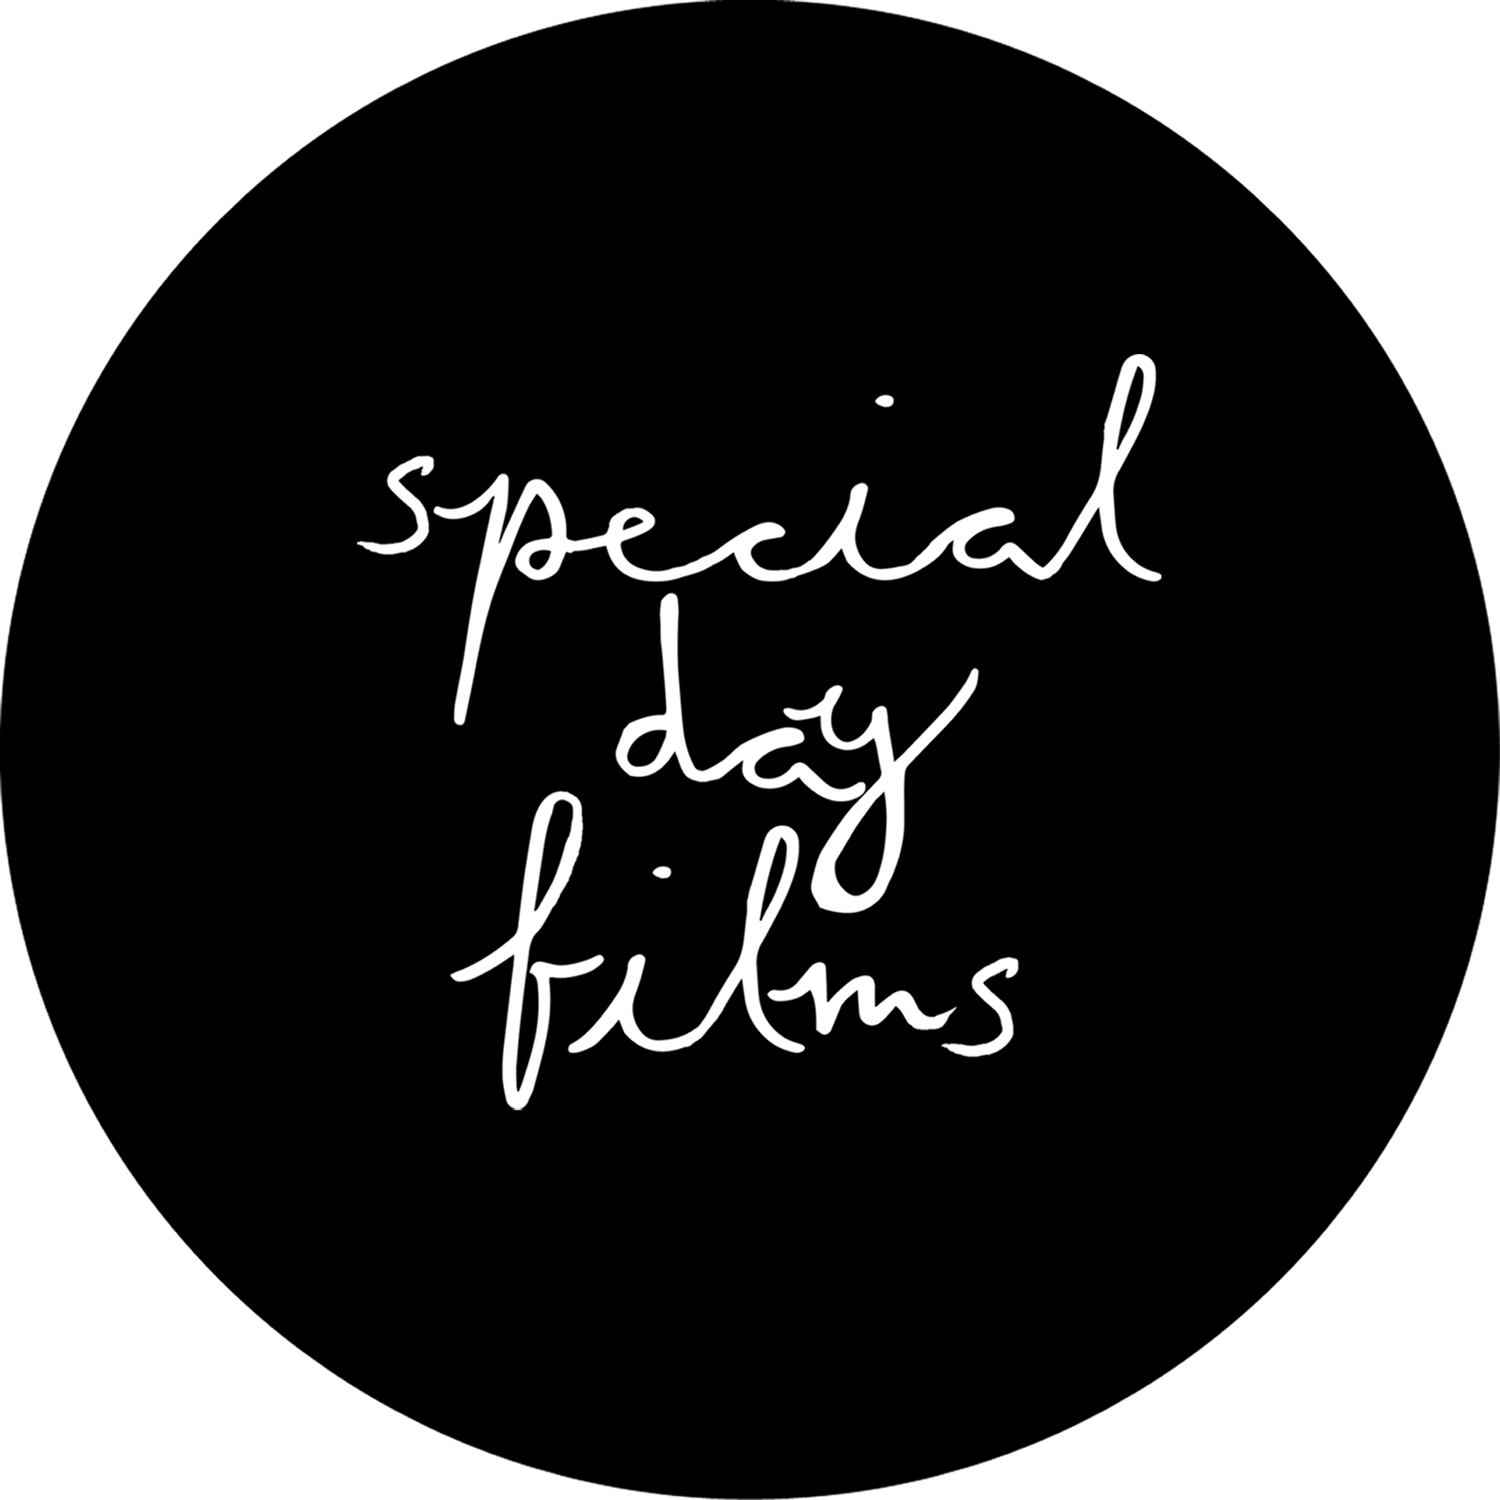 Special Day Films